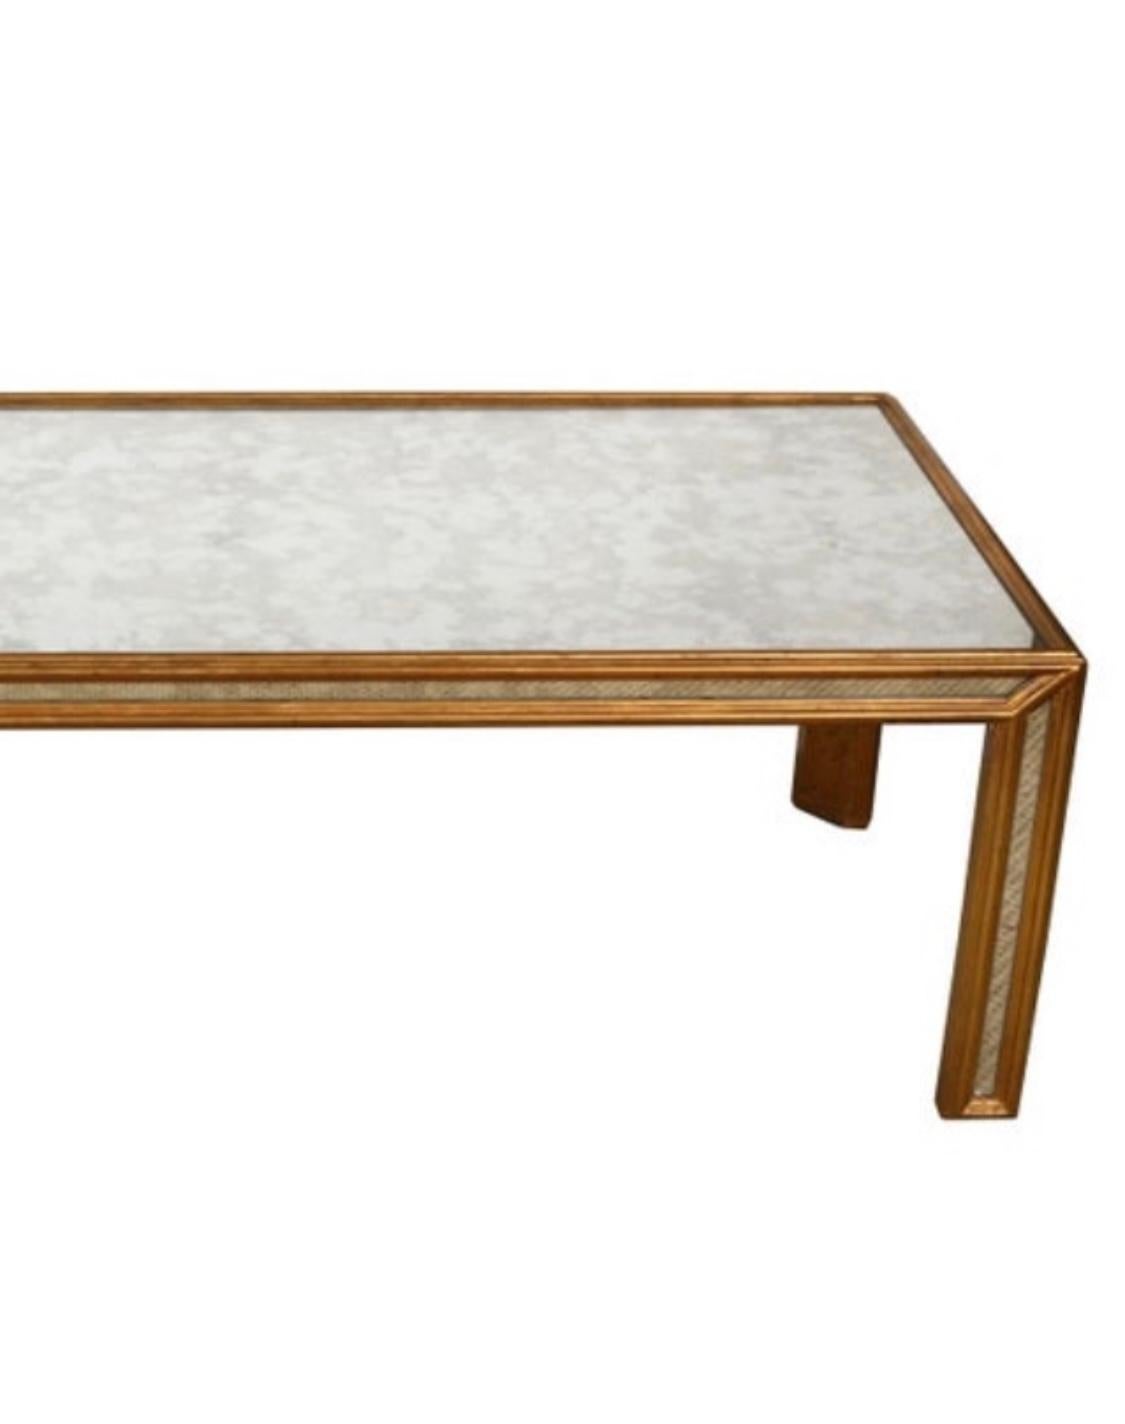 Elegant Gilt and Mirrored Glass Coffee Table by Bernhardt In Good Condition For Sale In Brooklyn, NY